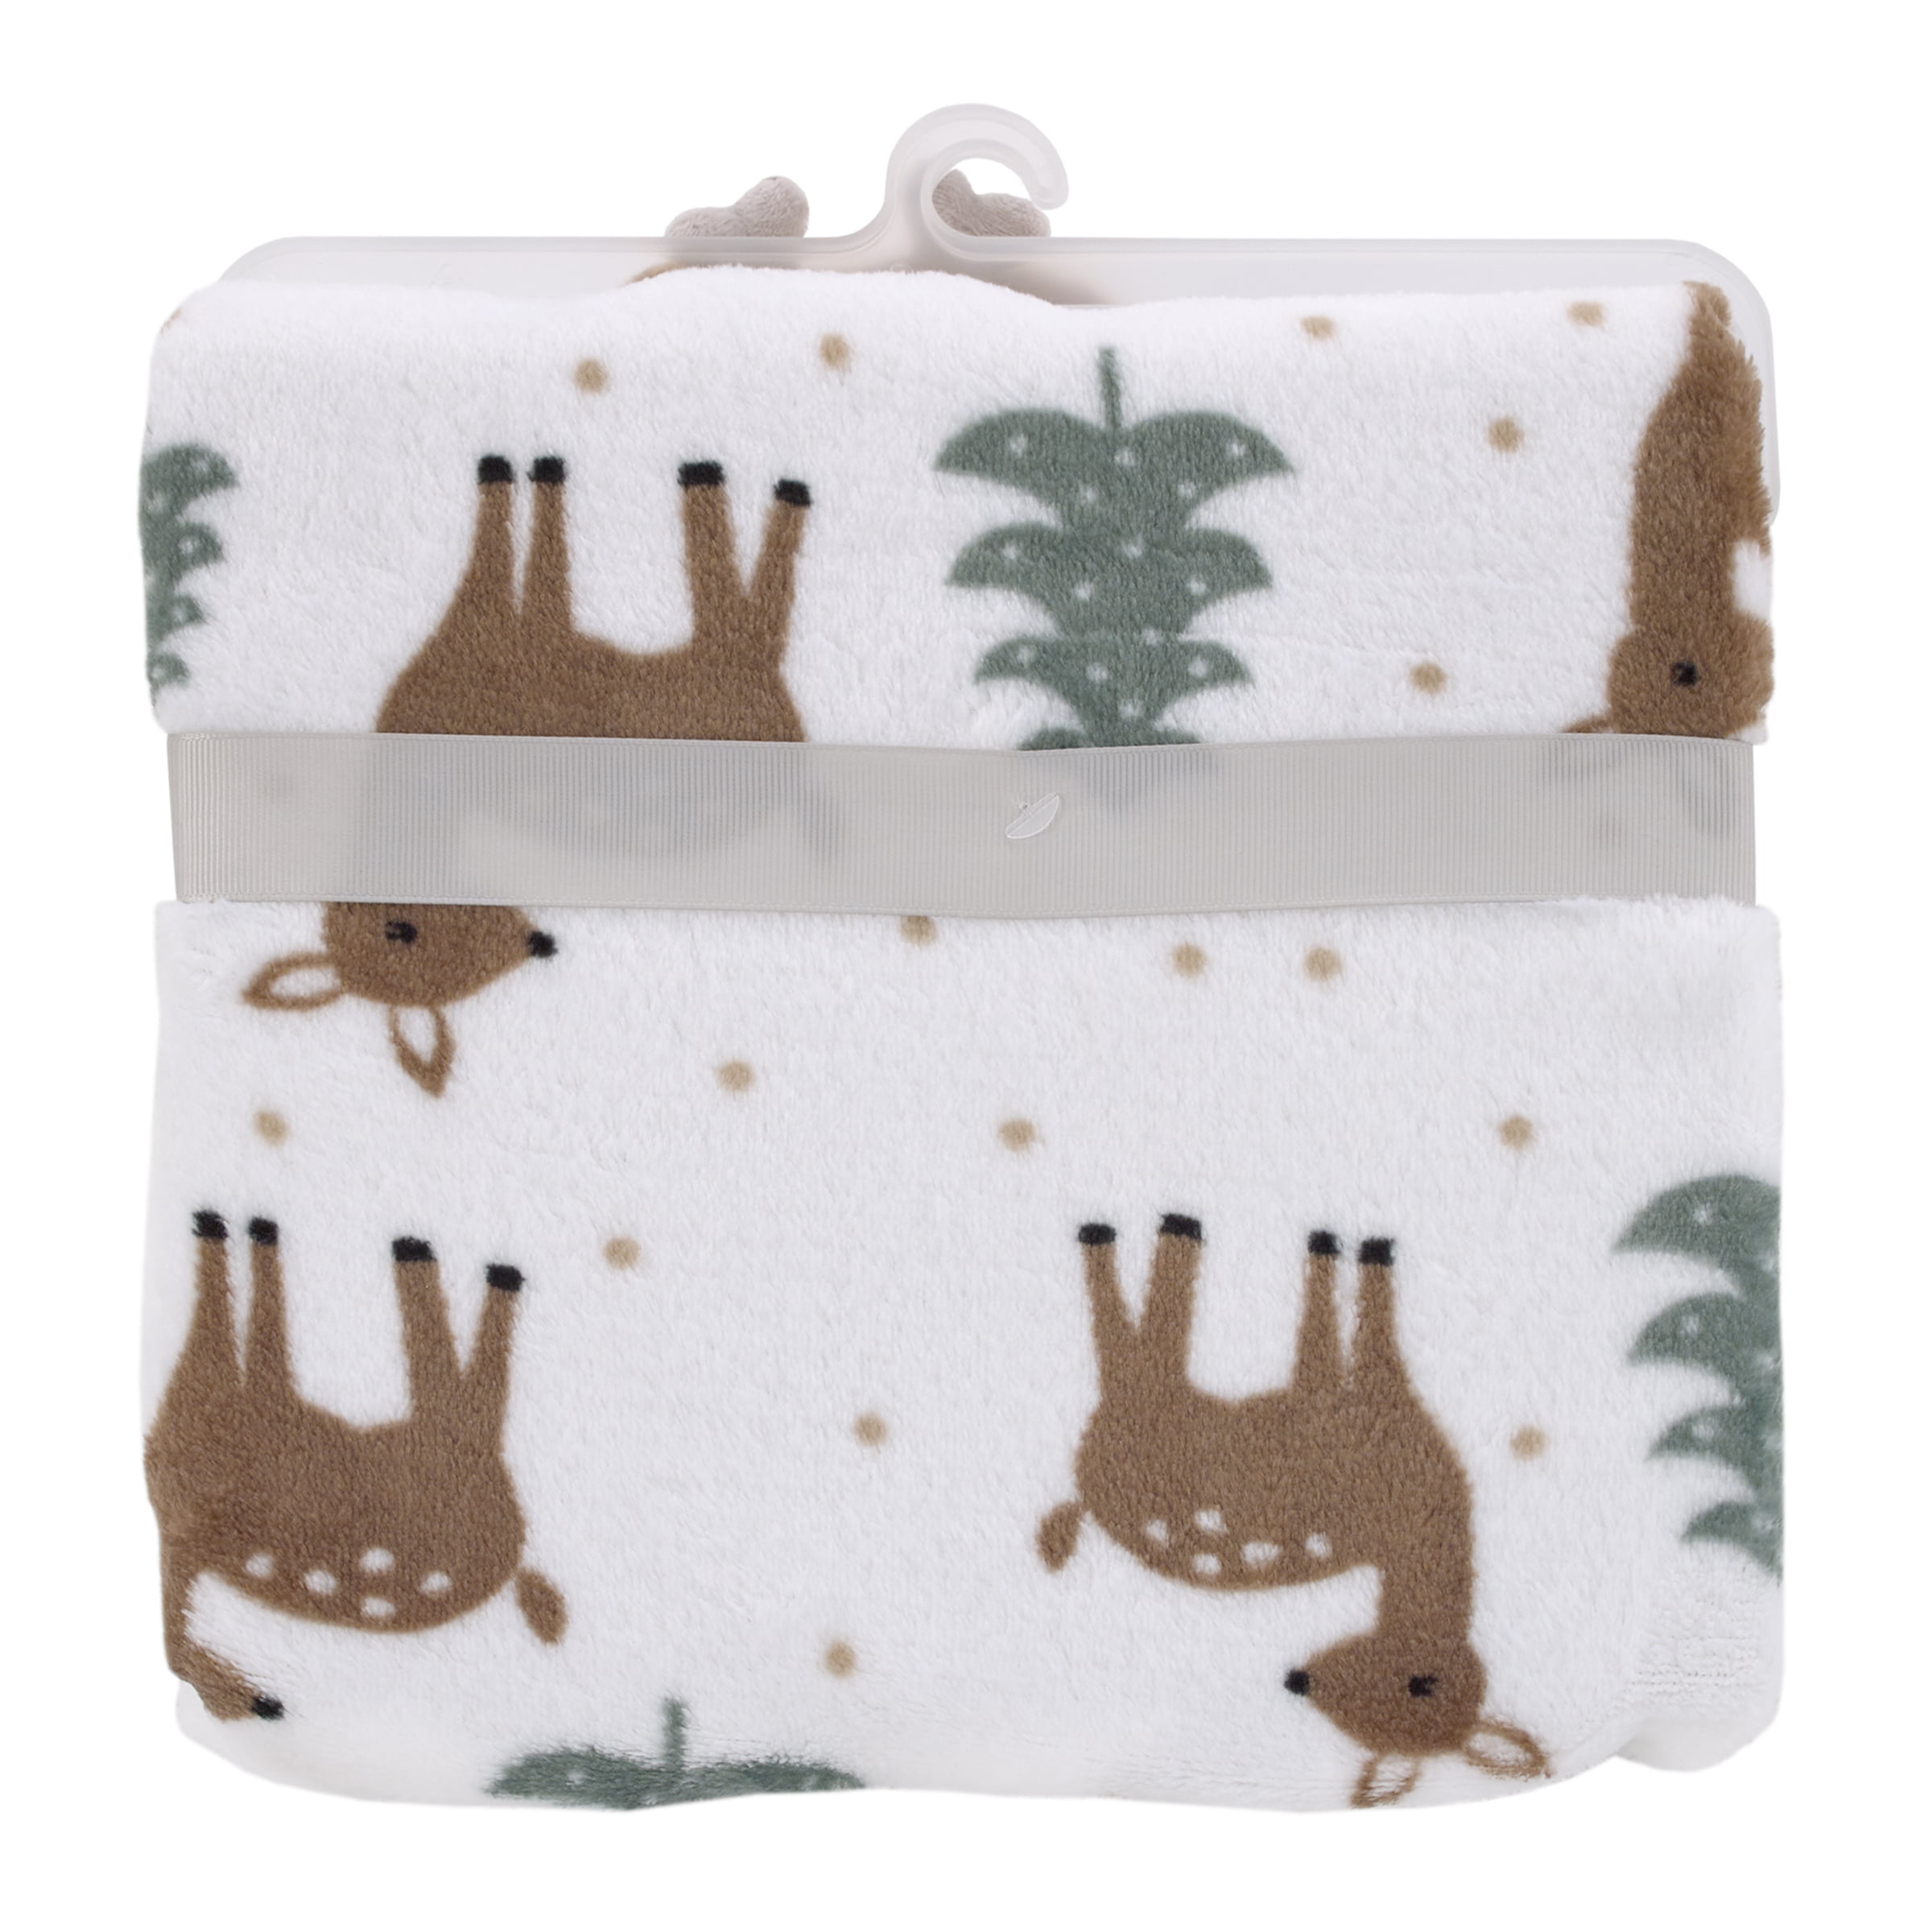 Cuddly Blanket Deer Bieco Customizable Gift for the Birth of a